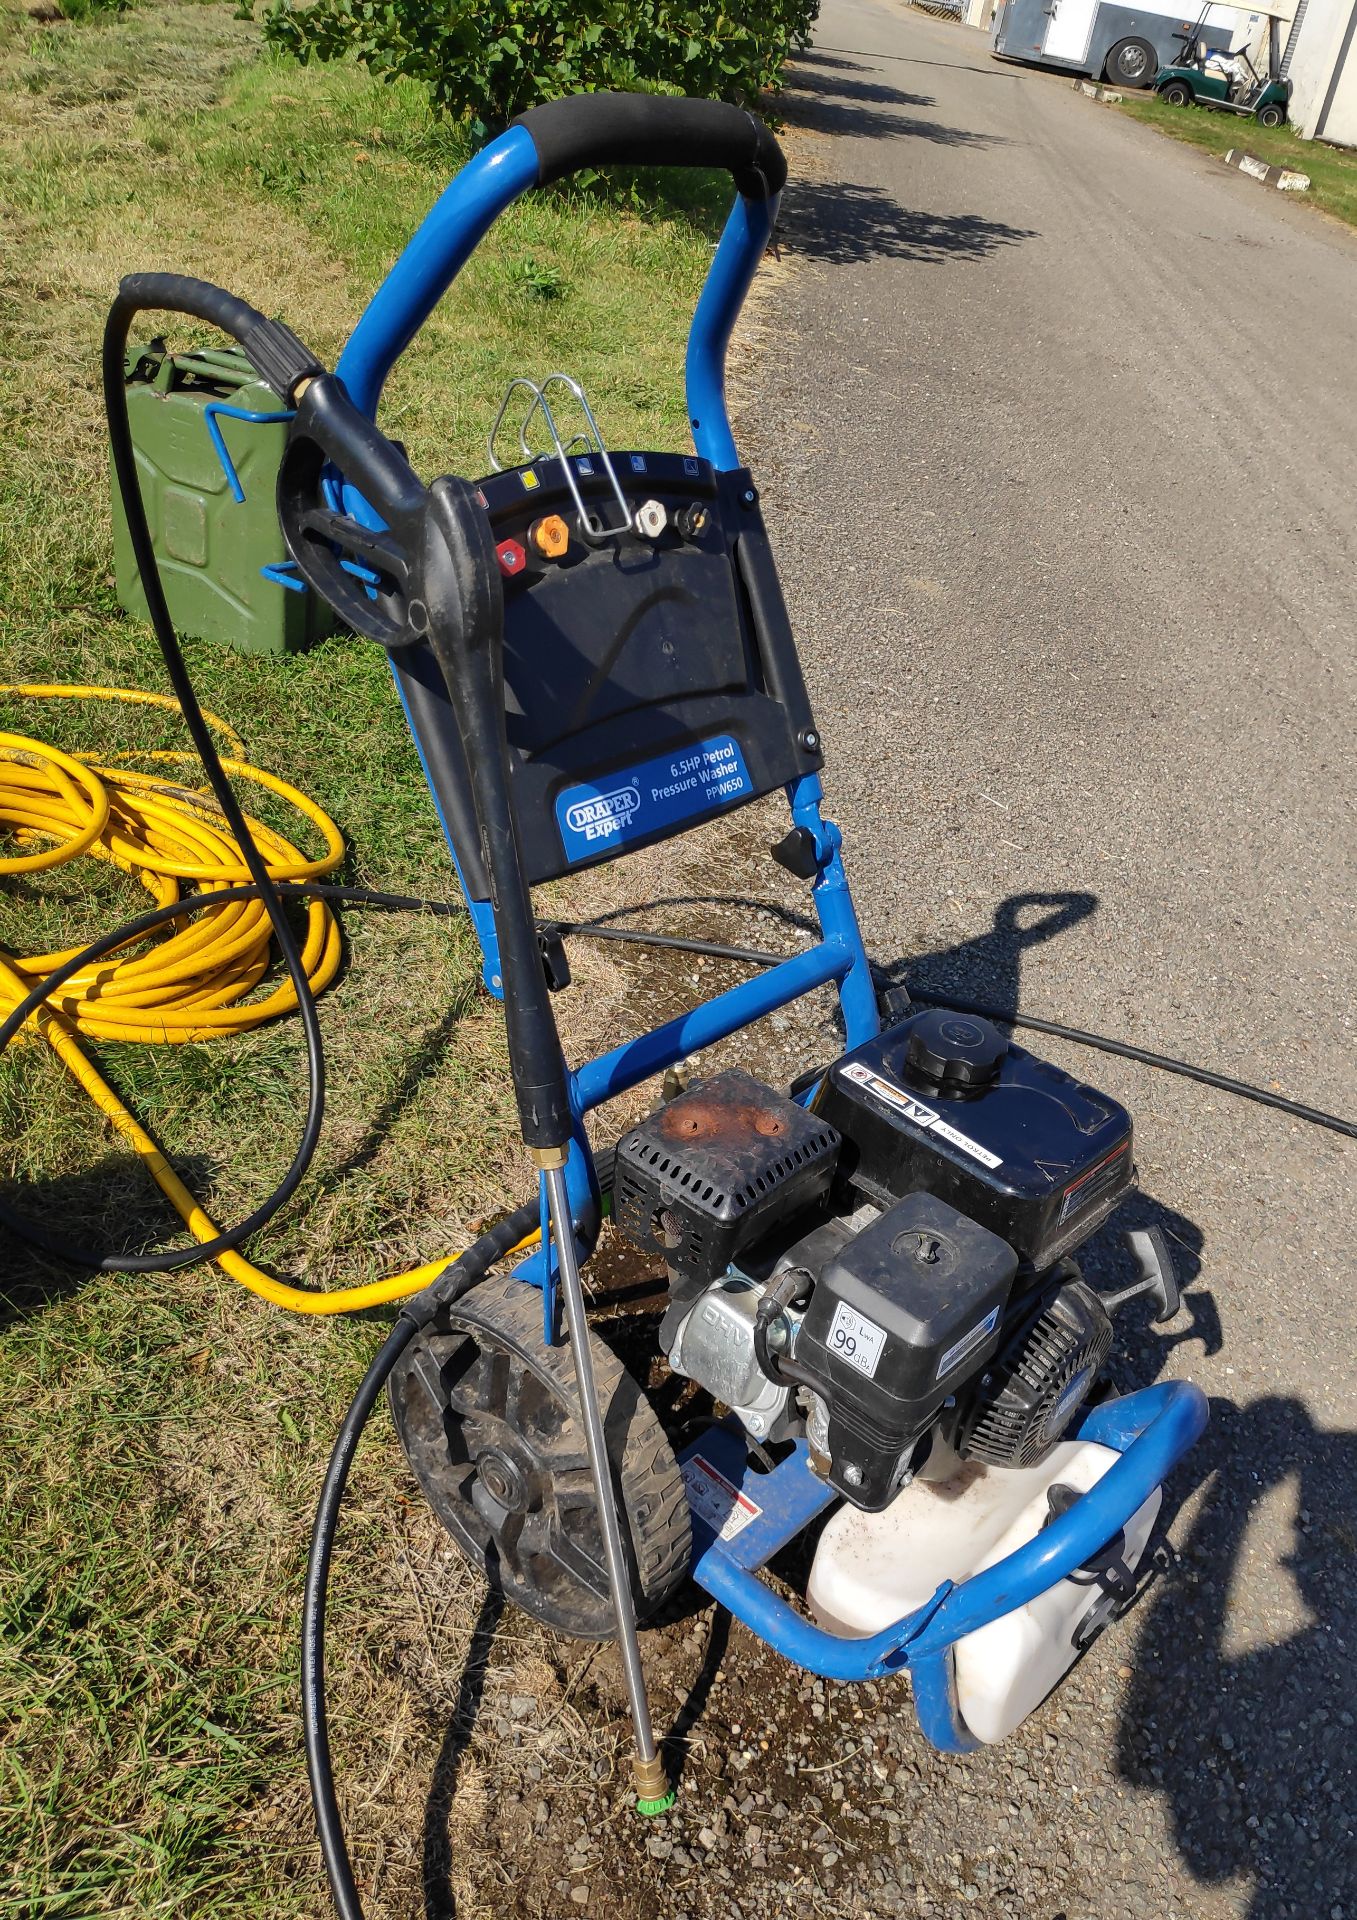 1 x Draper Expert 6.5Hp Petrol Pressure Washer PPW650 - CL682 - Location: Bedford NN29 - Image 6 of 10